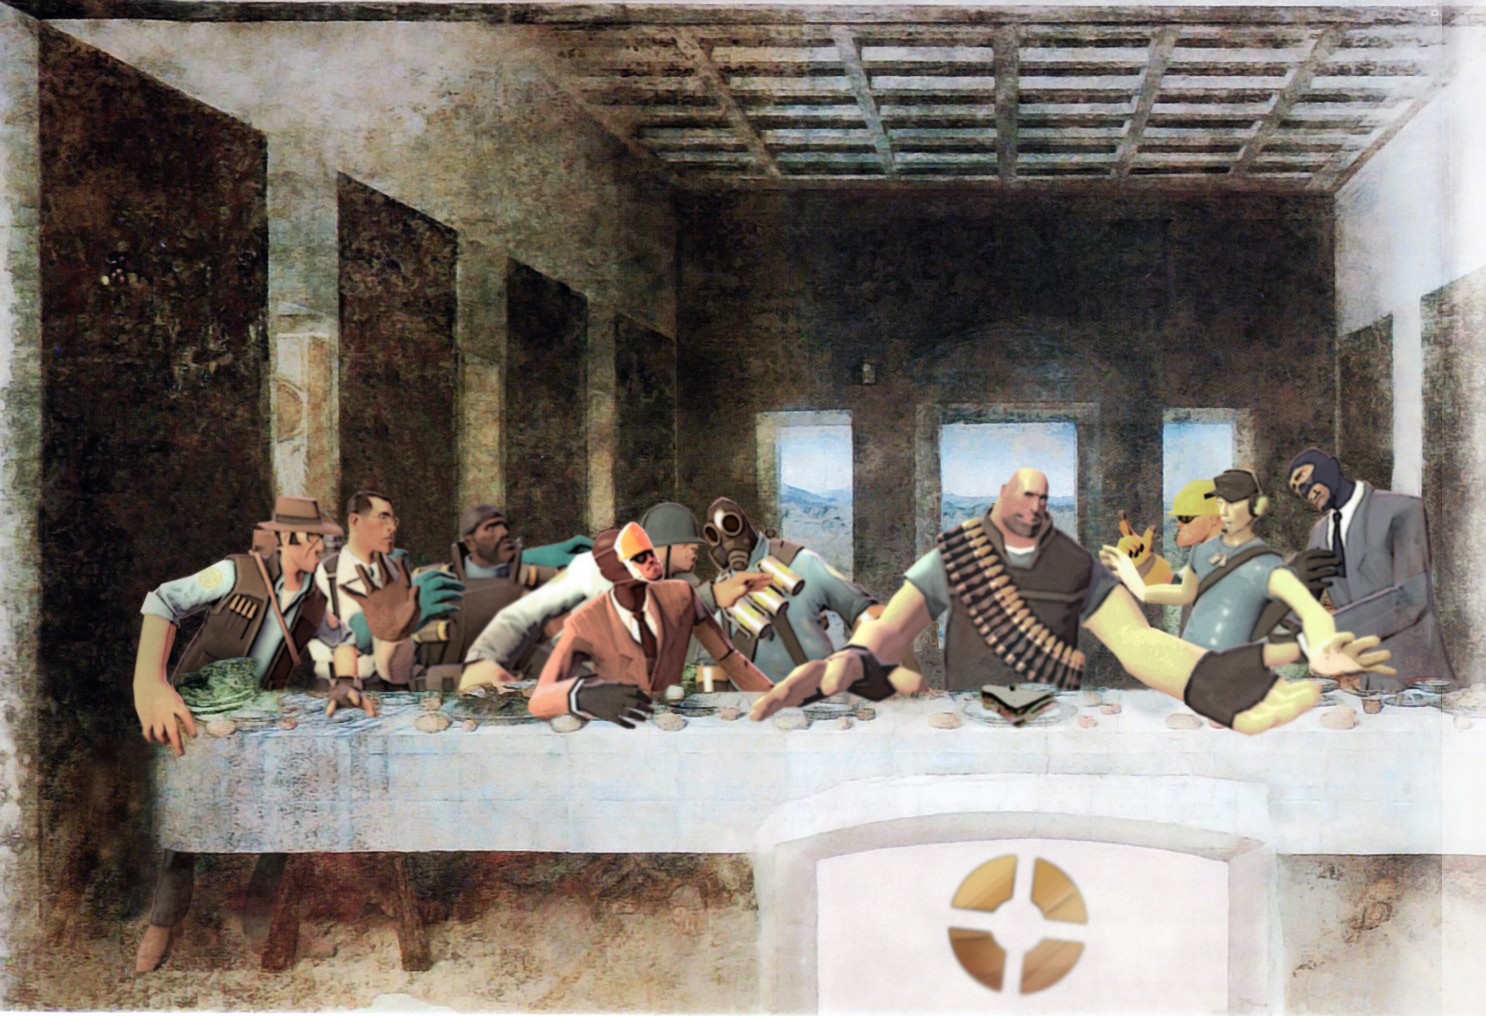 General 1486x1016 Scout (TF2) medic Heavy (TF2) The Last Supper Spy (character) video games PC gaming video game art